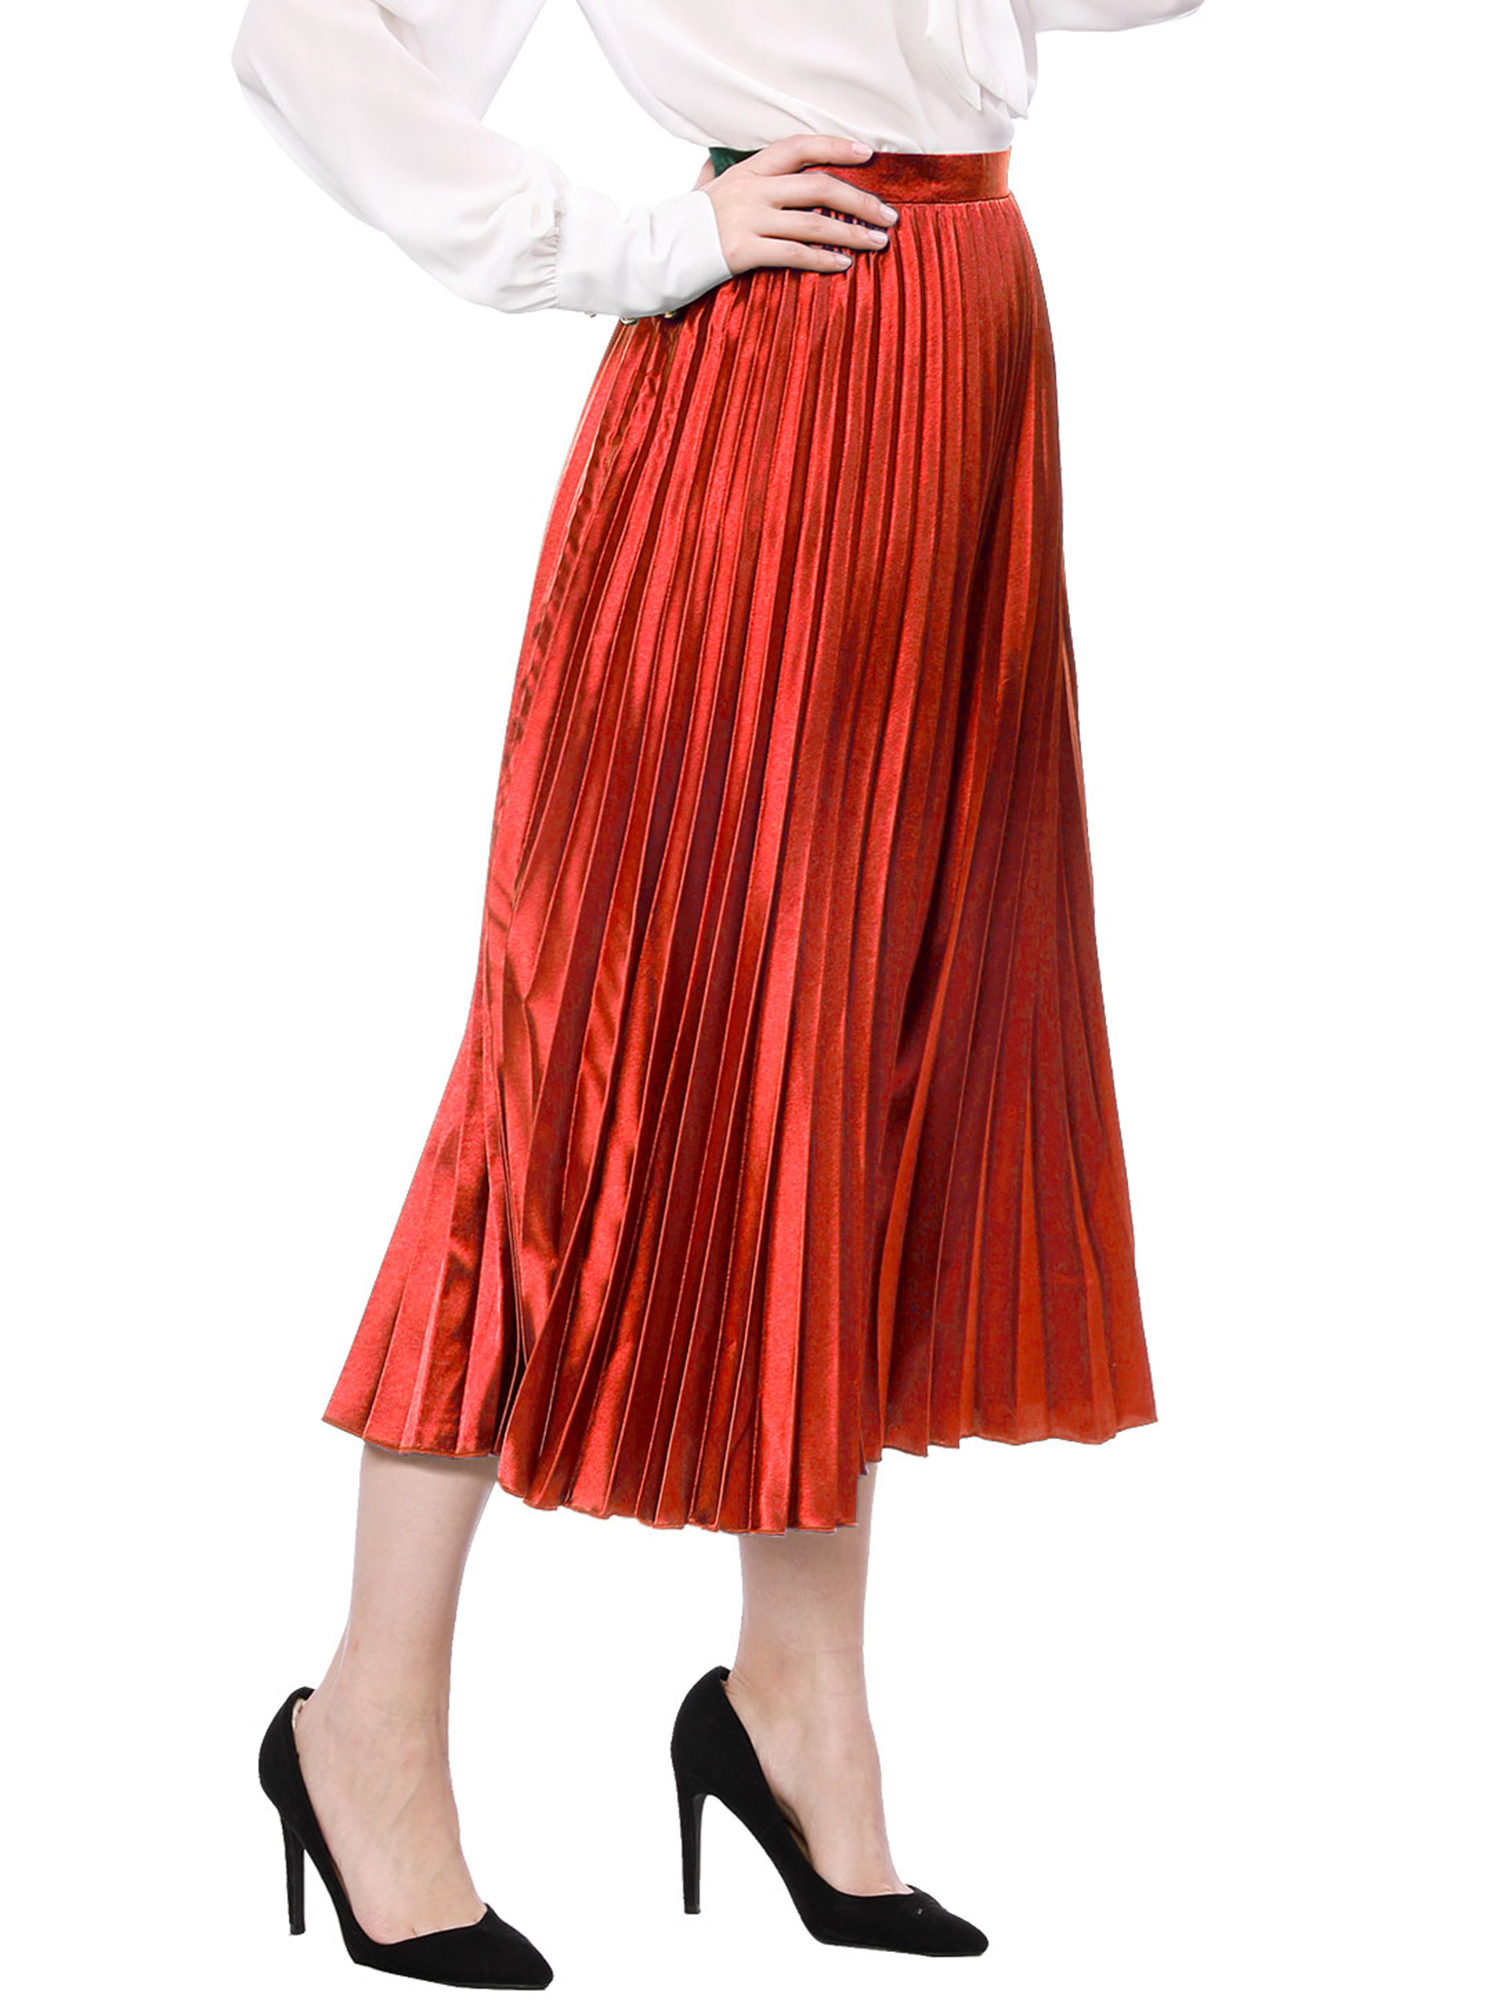 Unique Bargains Women's Halloween Costume A-line High Waist Pleated Midi Skirt L Red - image 5 of 8